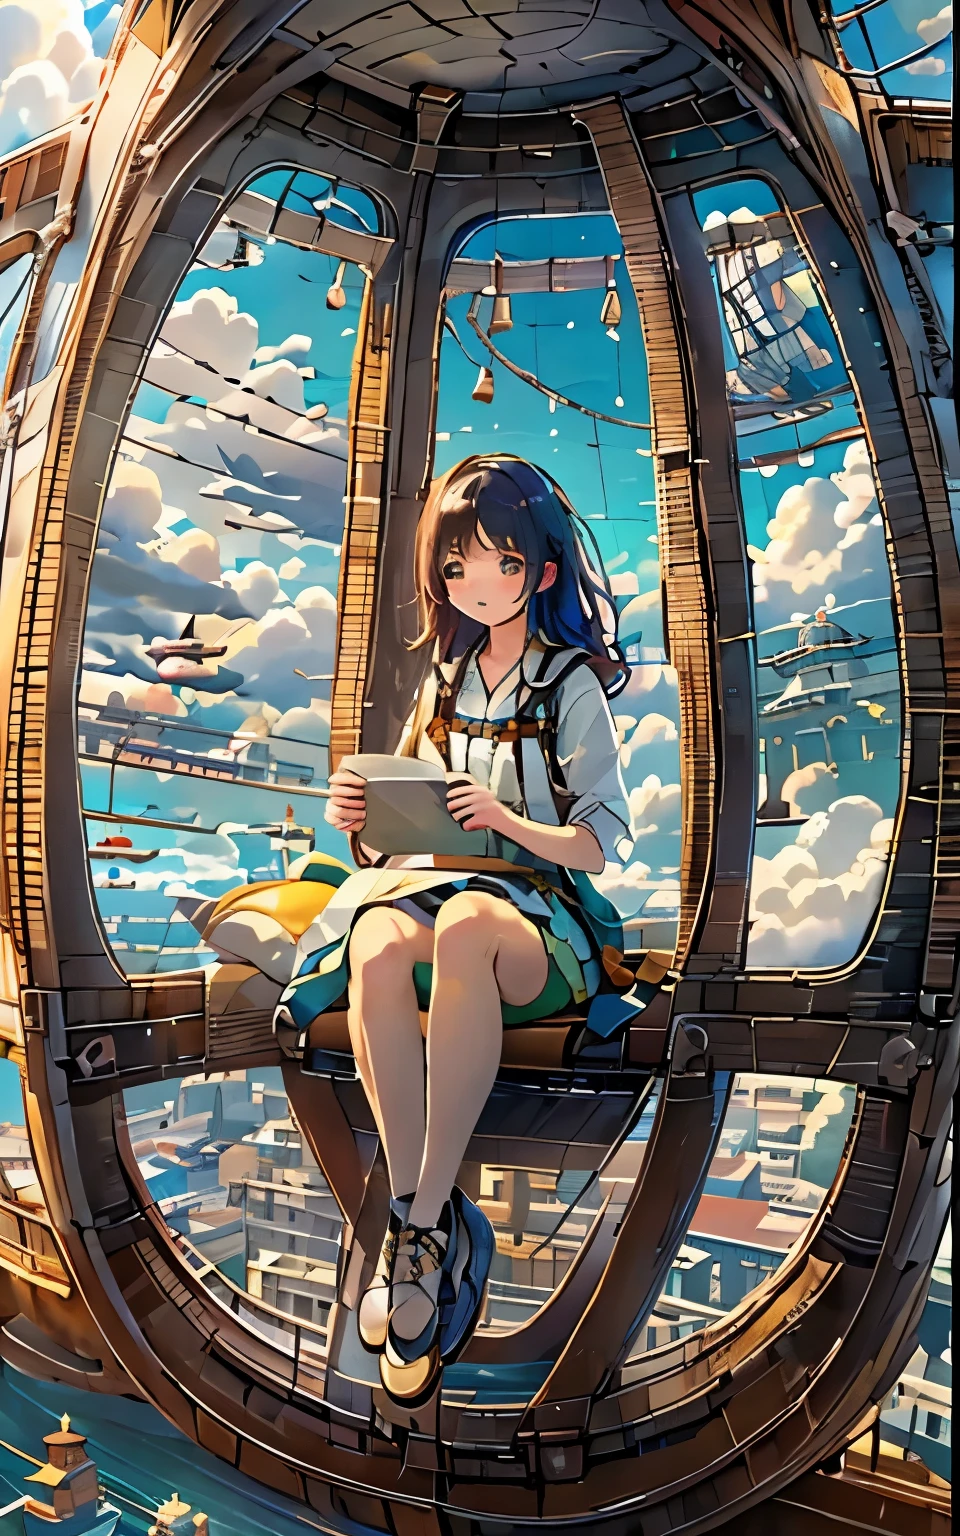 realistic depiction、one girl、corrupted、Holding a cushion、While traveling by airship、spectacular view from the window、A mysterious different world、